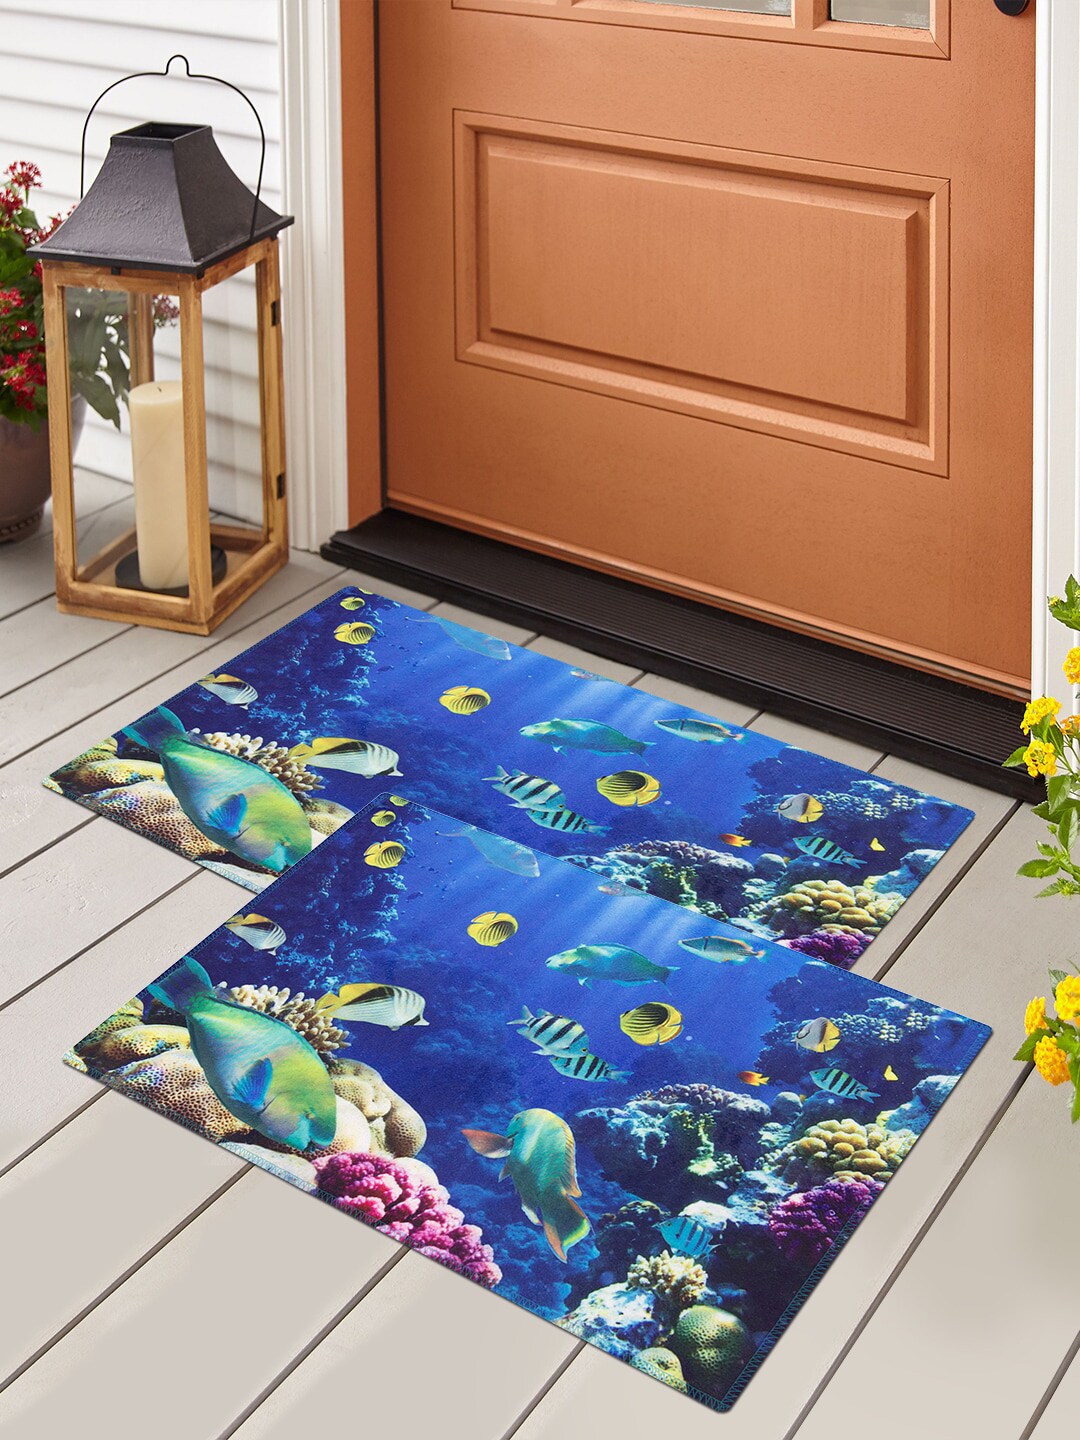 Story@home Set Of 2 Blue & Yellow Printed Anti-Skid Doormats Price in India